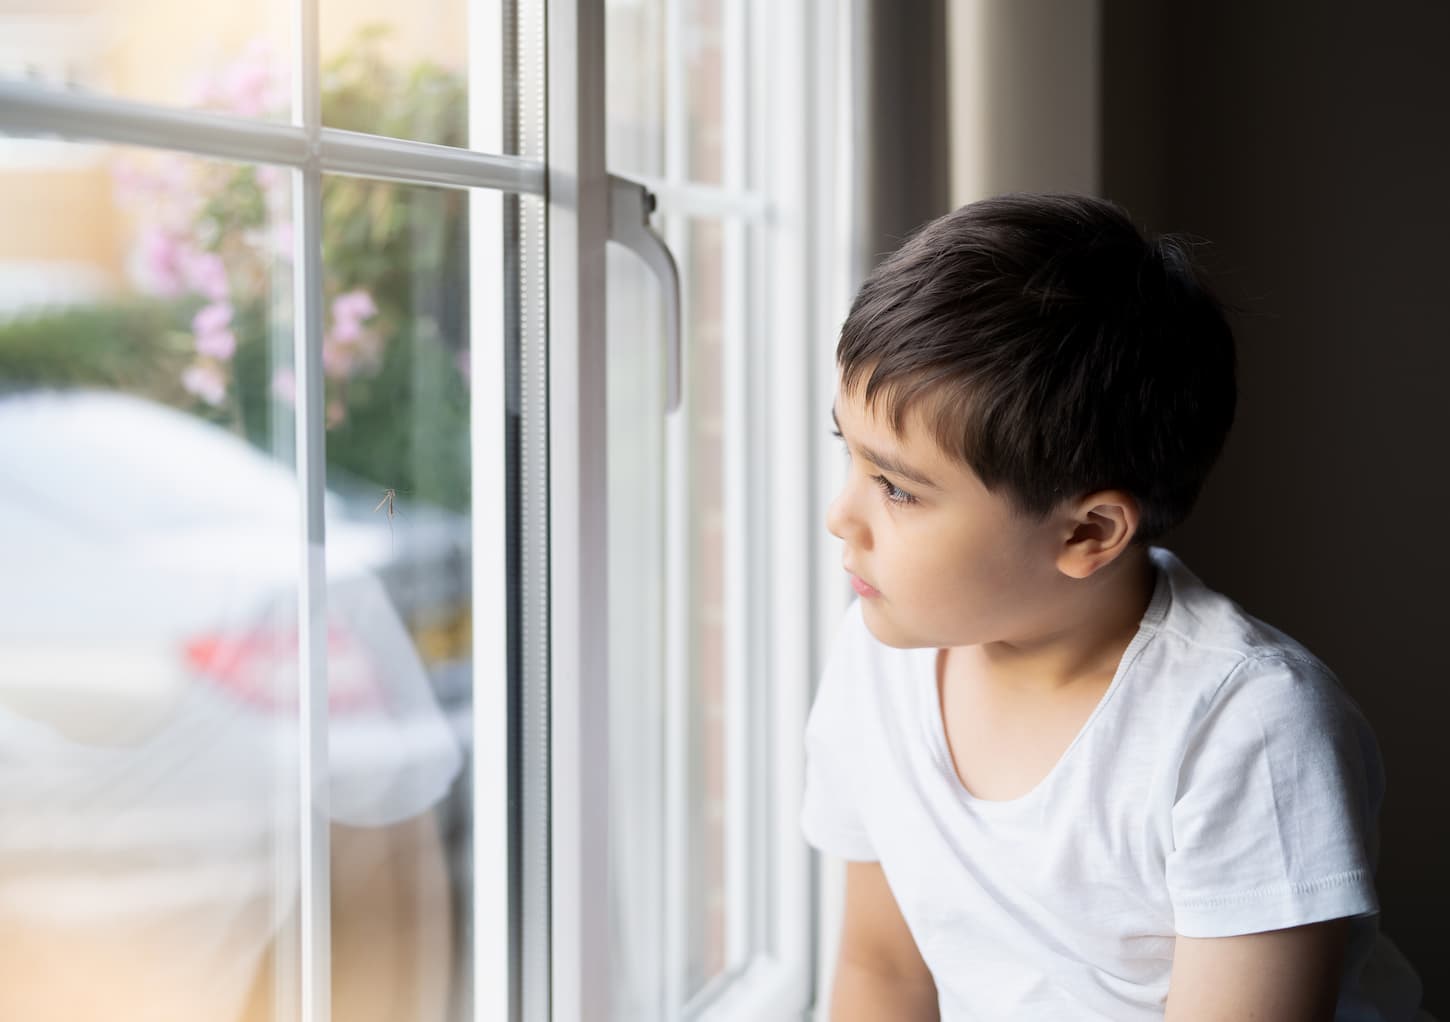 An image of a Kid looking at the midge climbing up outside of the double-glazed window. Young boy looking at insect.